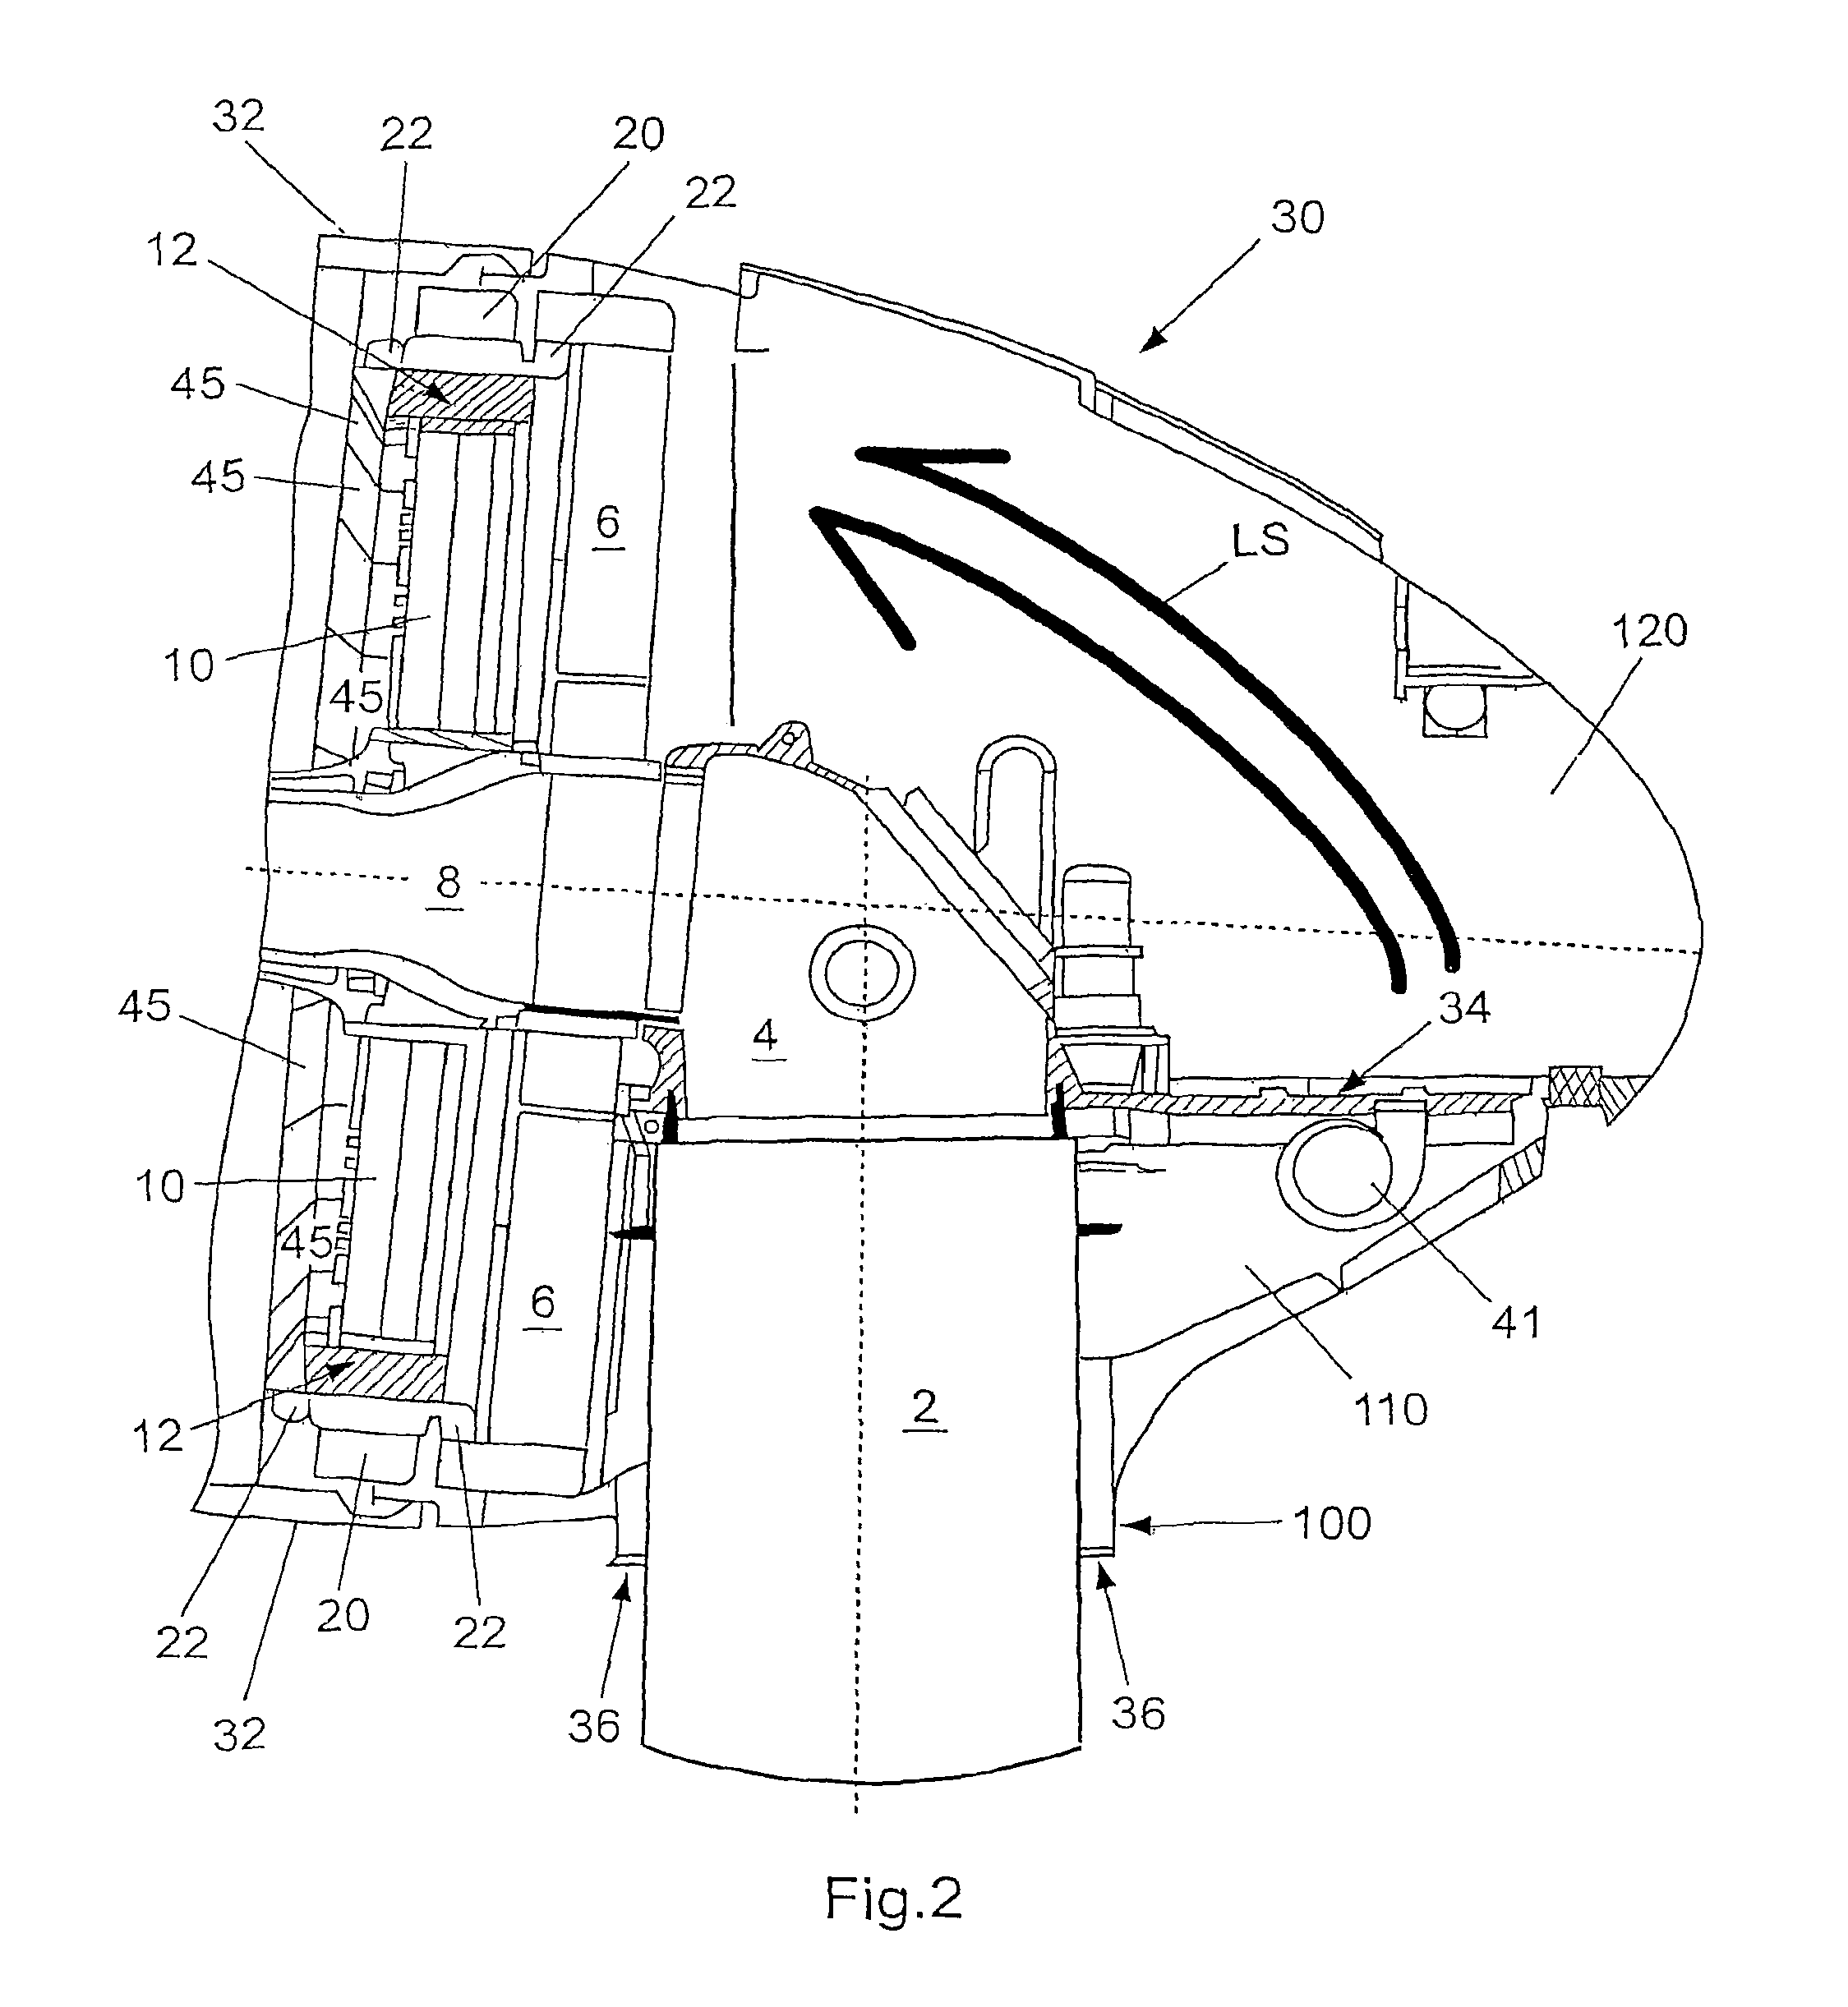 Wind turbine comprising a generator cooling system